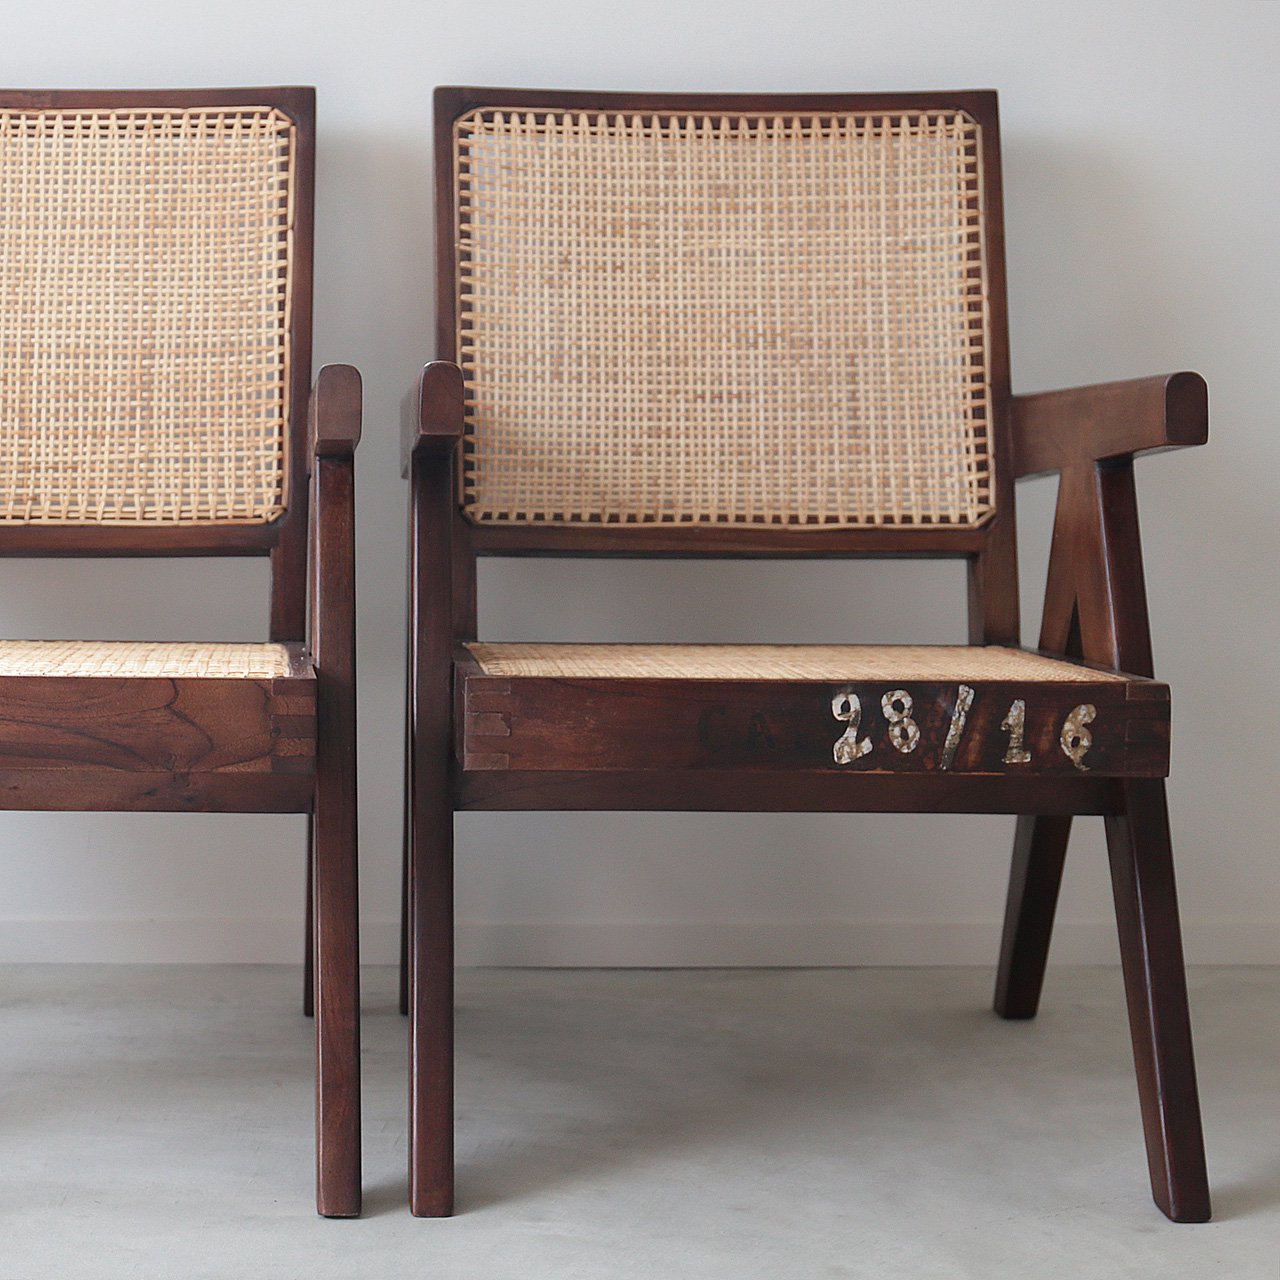 [Easy Chair] ピエールジャンヌレ PierreJeanneret リプロダクト | Another Life ― ANTIQUE  FURNITURE＆NEW FURNITURE